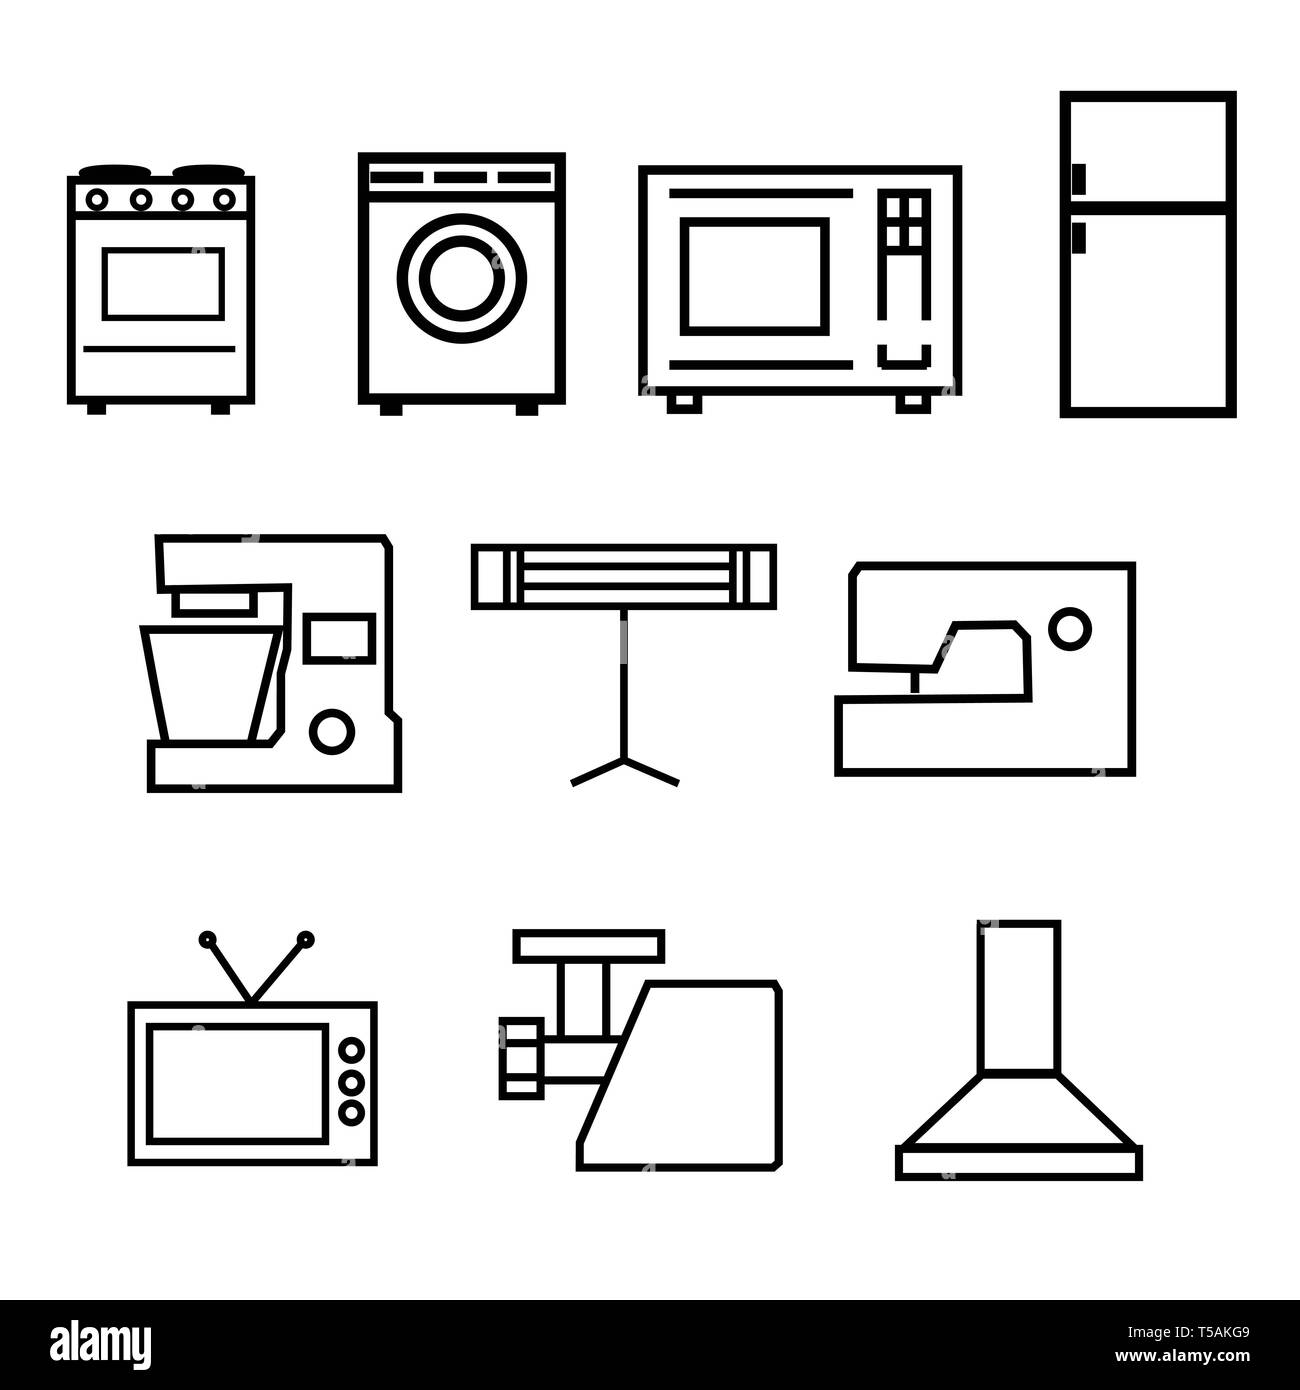 Set of household appliances icons. stove, washing machine, microwave, refrigerator, coffee machine, blender, air conditioner, extractor fan, TV, sewin Stock Photo